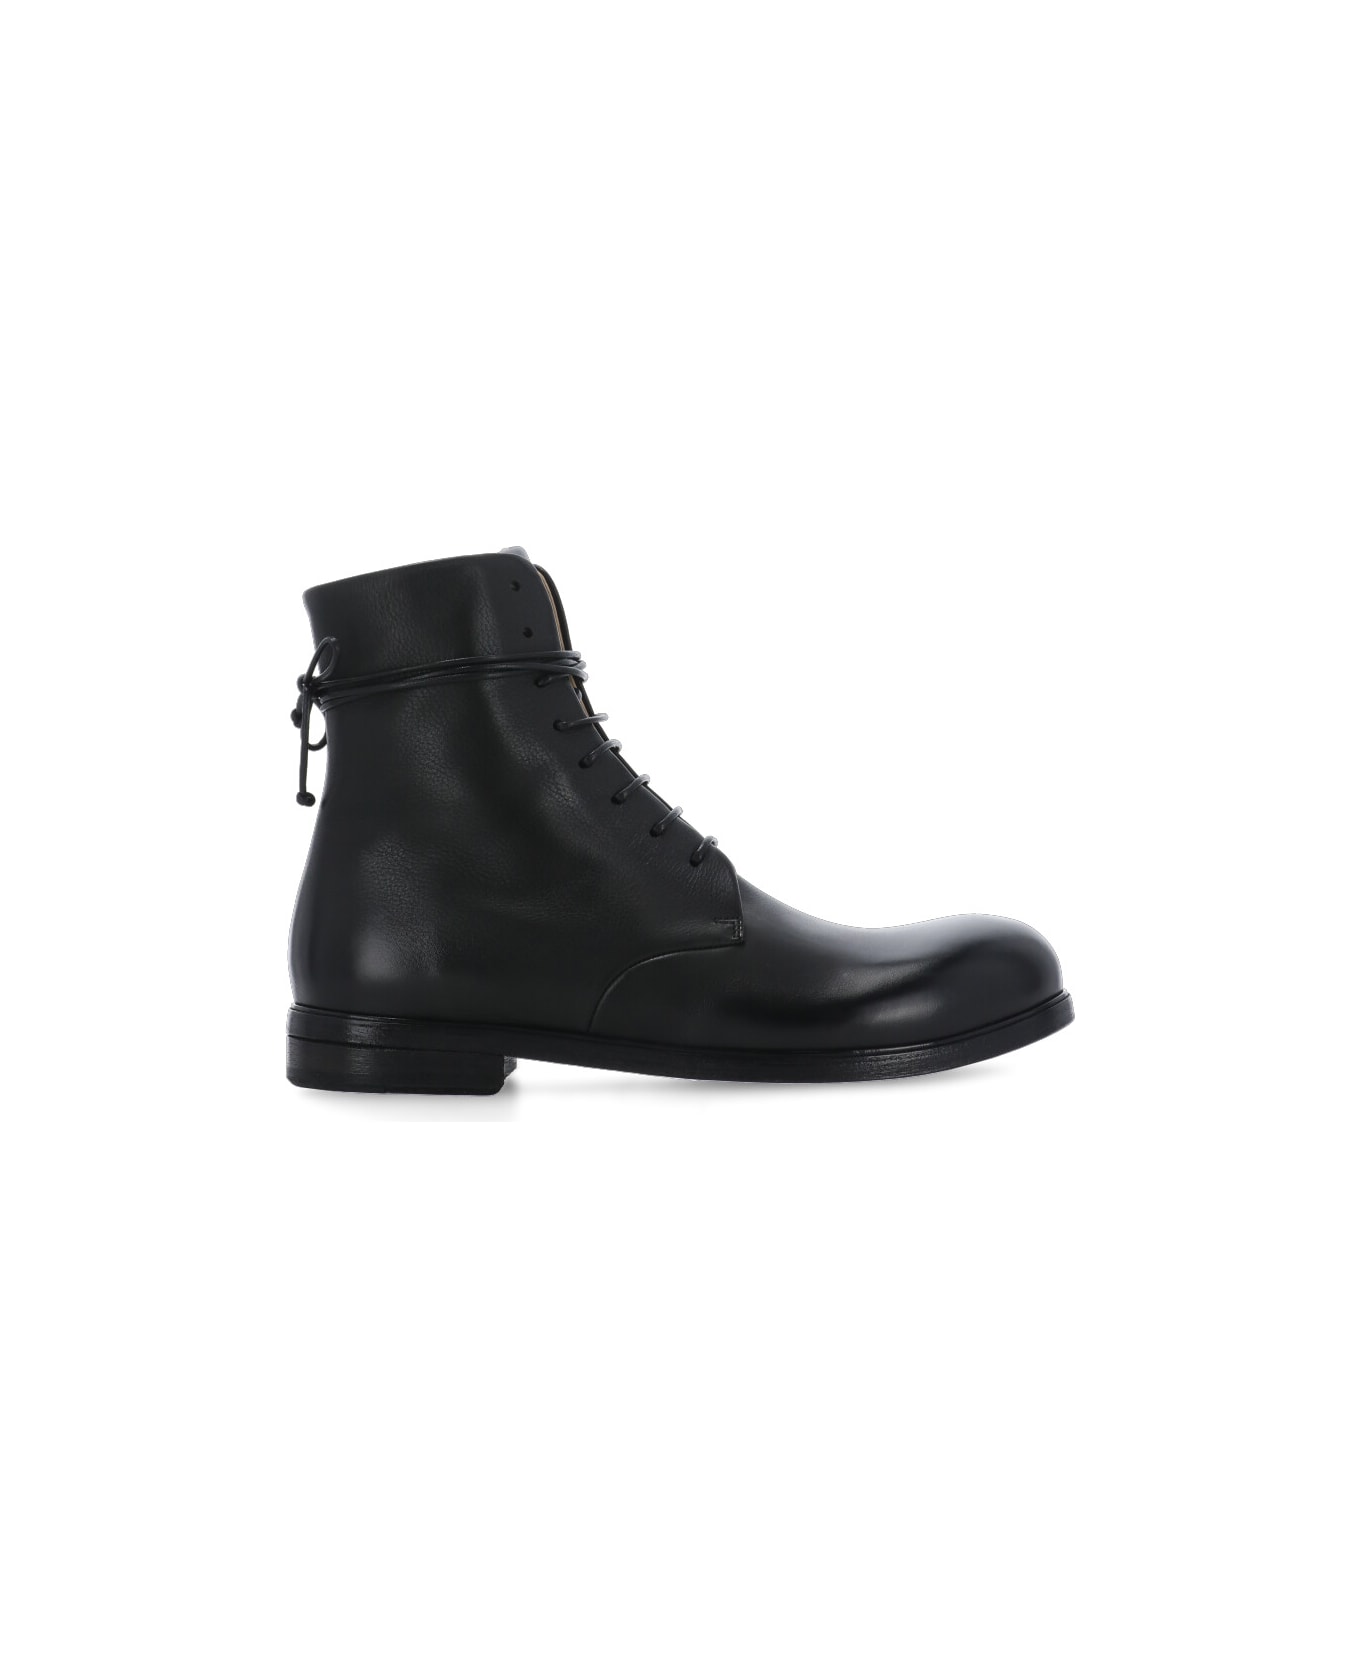 Marsell Zucca Ankle Boots - Black ブーツ